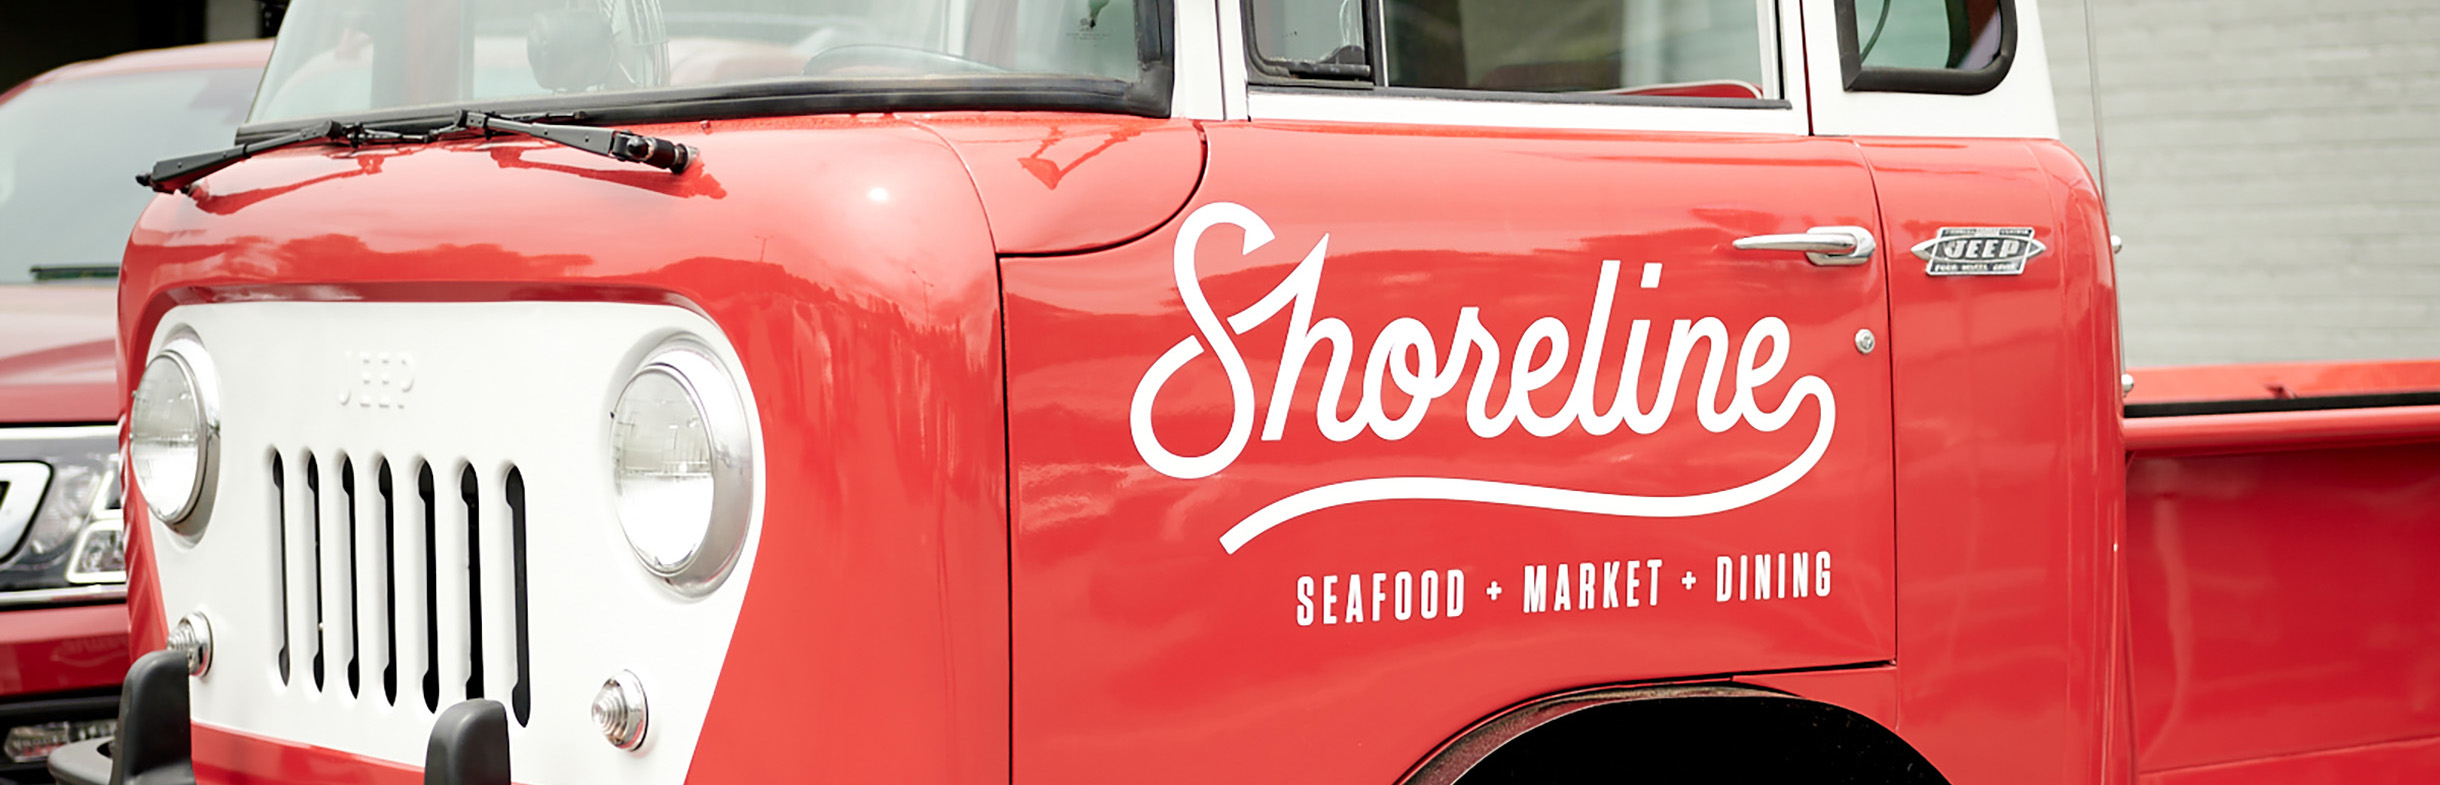 Stop By, Say Hi. Hero for the Contact Page at Shoreline Fresh Seafood Market + Dining :: Richmond VA (RVA)